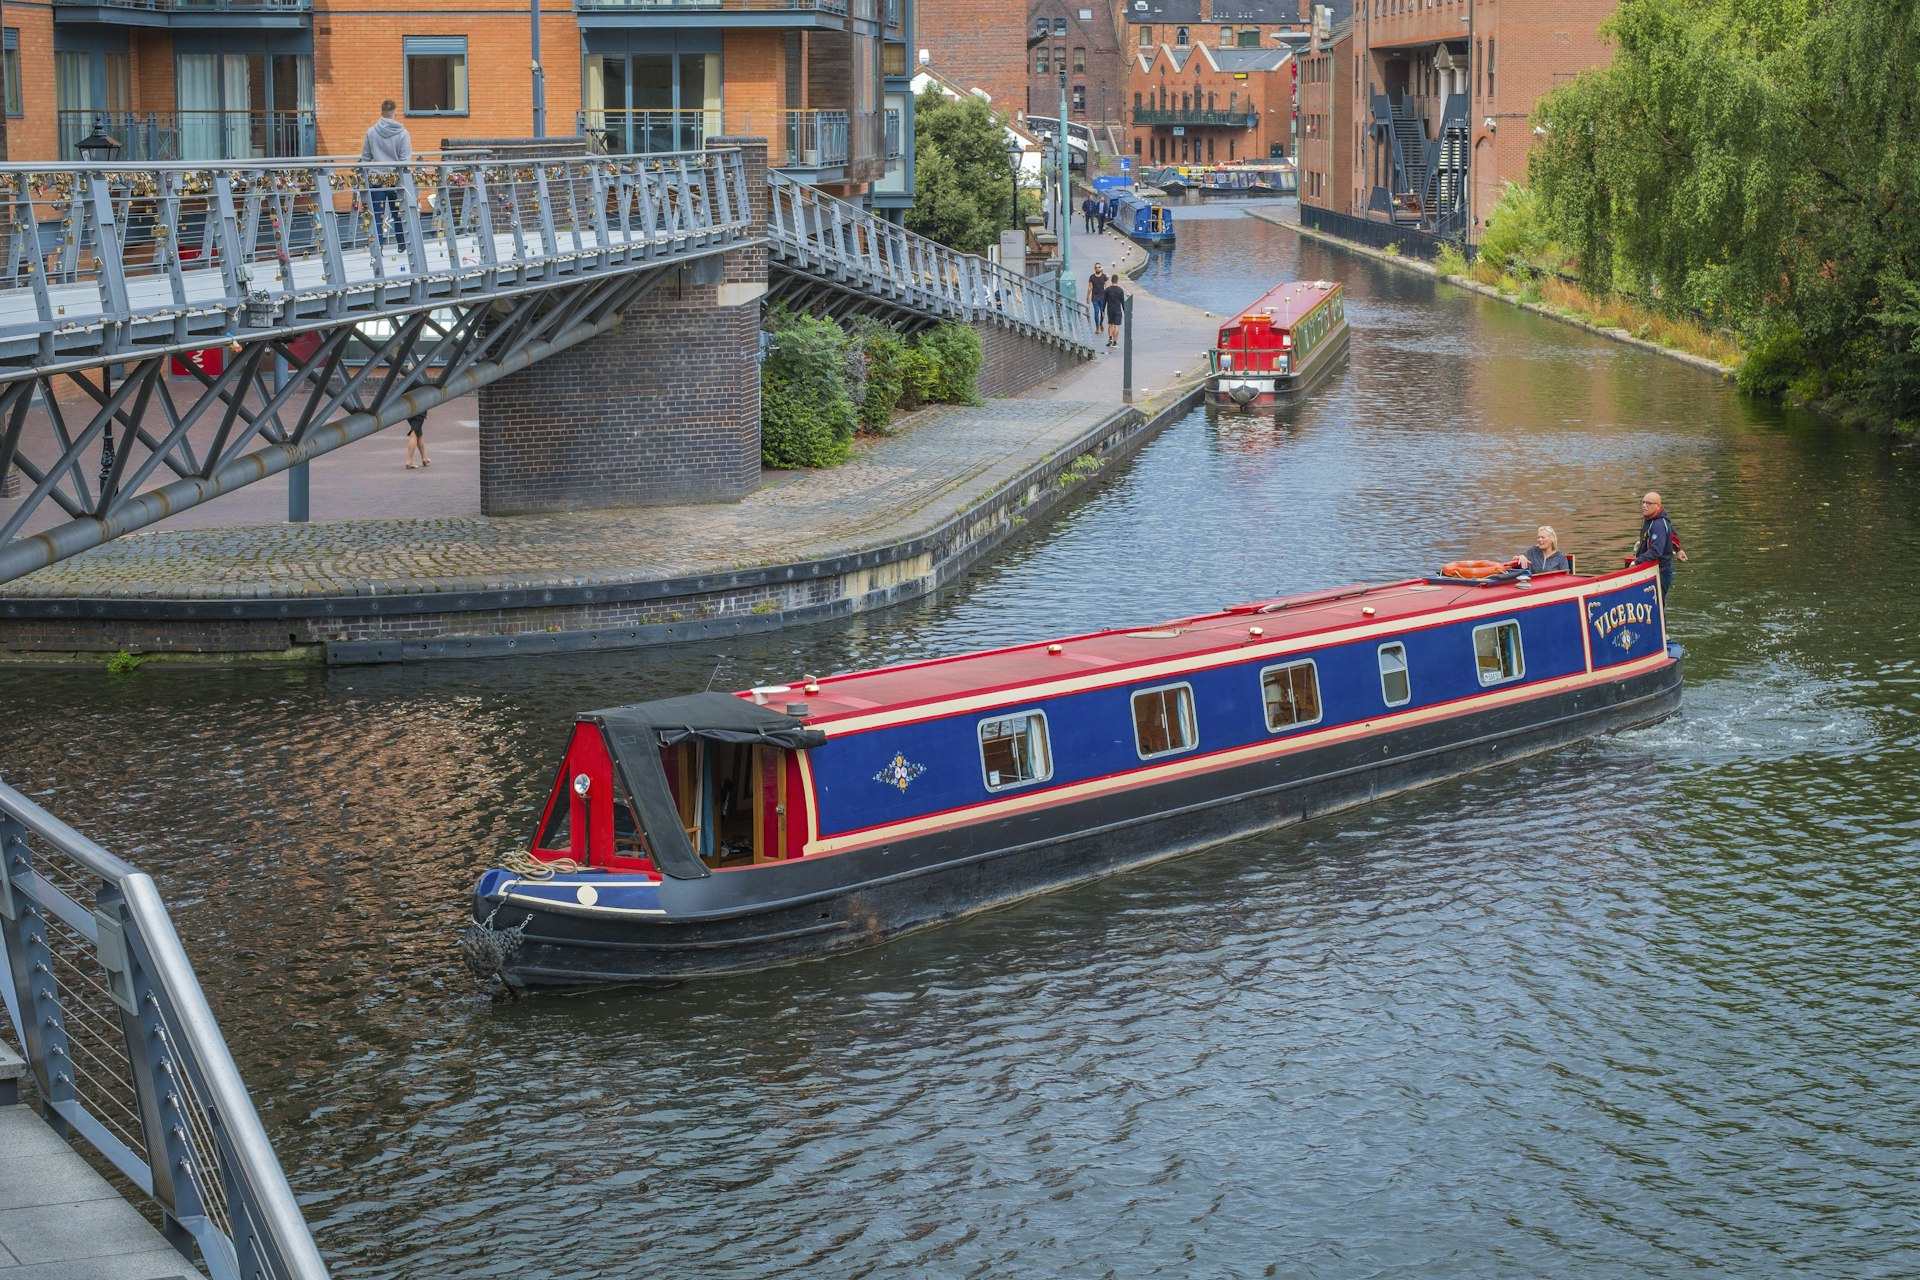 A narrowboat negotiates the corner on the Birmingham Canal Old Main Line at Salvage Turn Bridge by The Mailbox